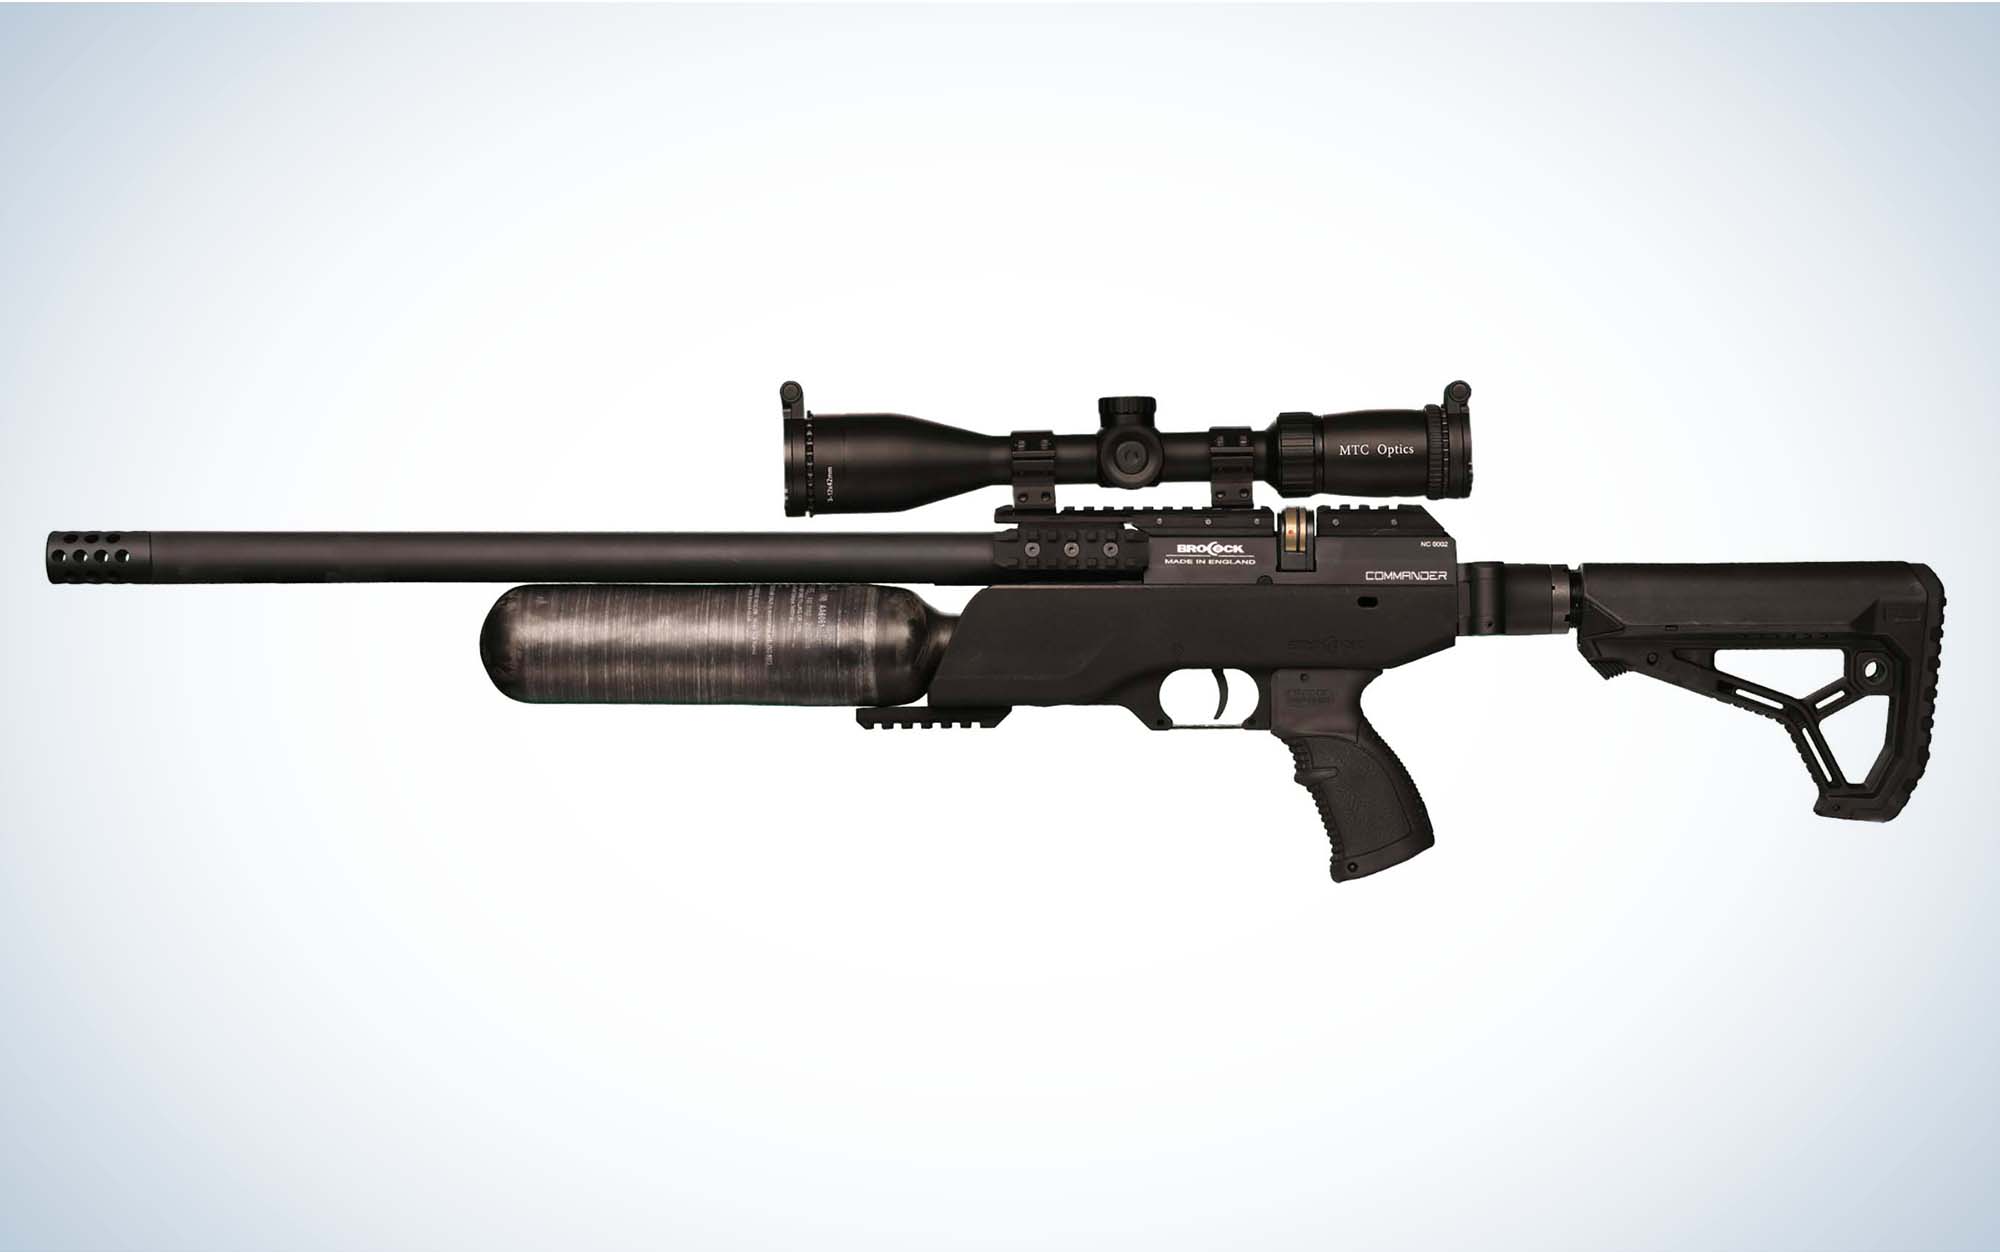 The Brocock Commander is available in a black synthetic stock.